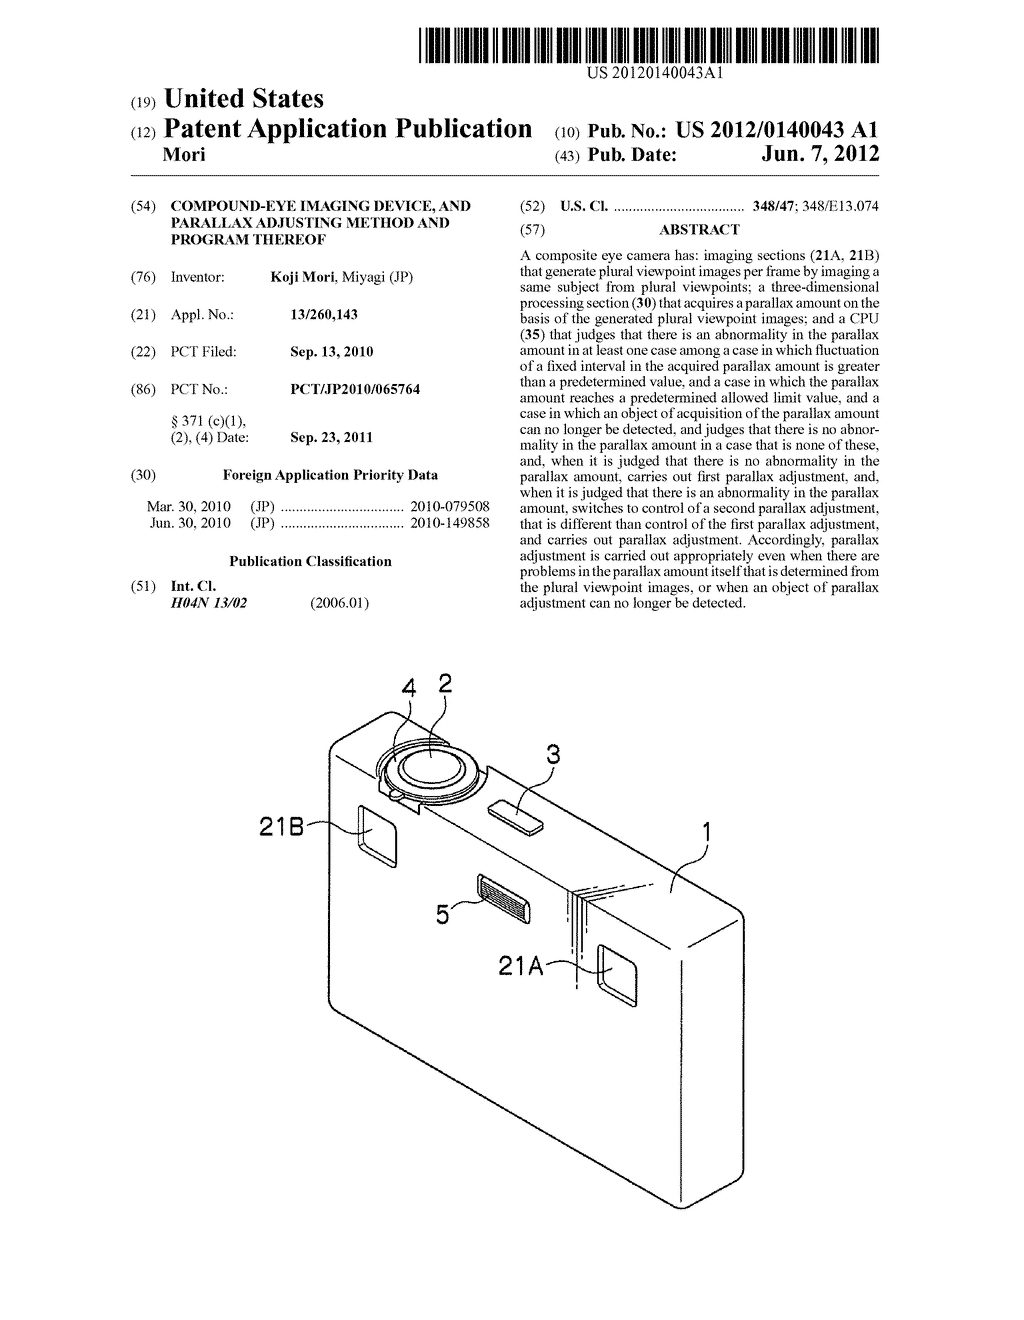 COMPOUND-EYE IMAGING DEVICE, AND PARALLAX ADJUSTING METHOD AND PROGRAM     THEREOF - diagram, schematic, and image 01